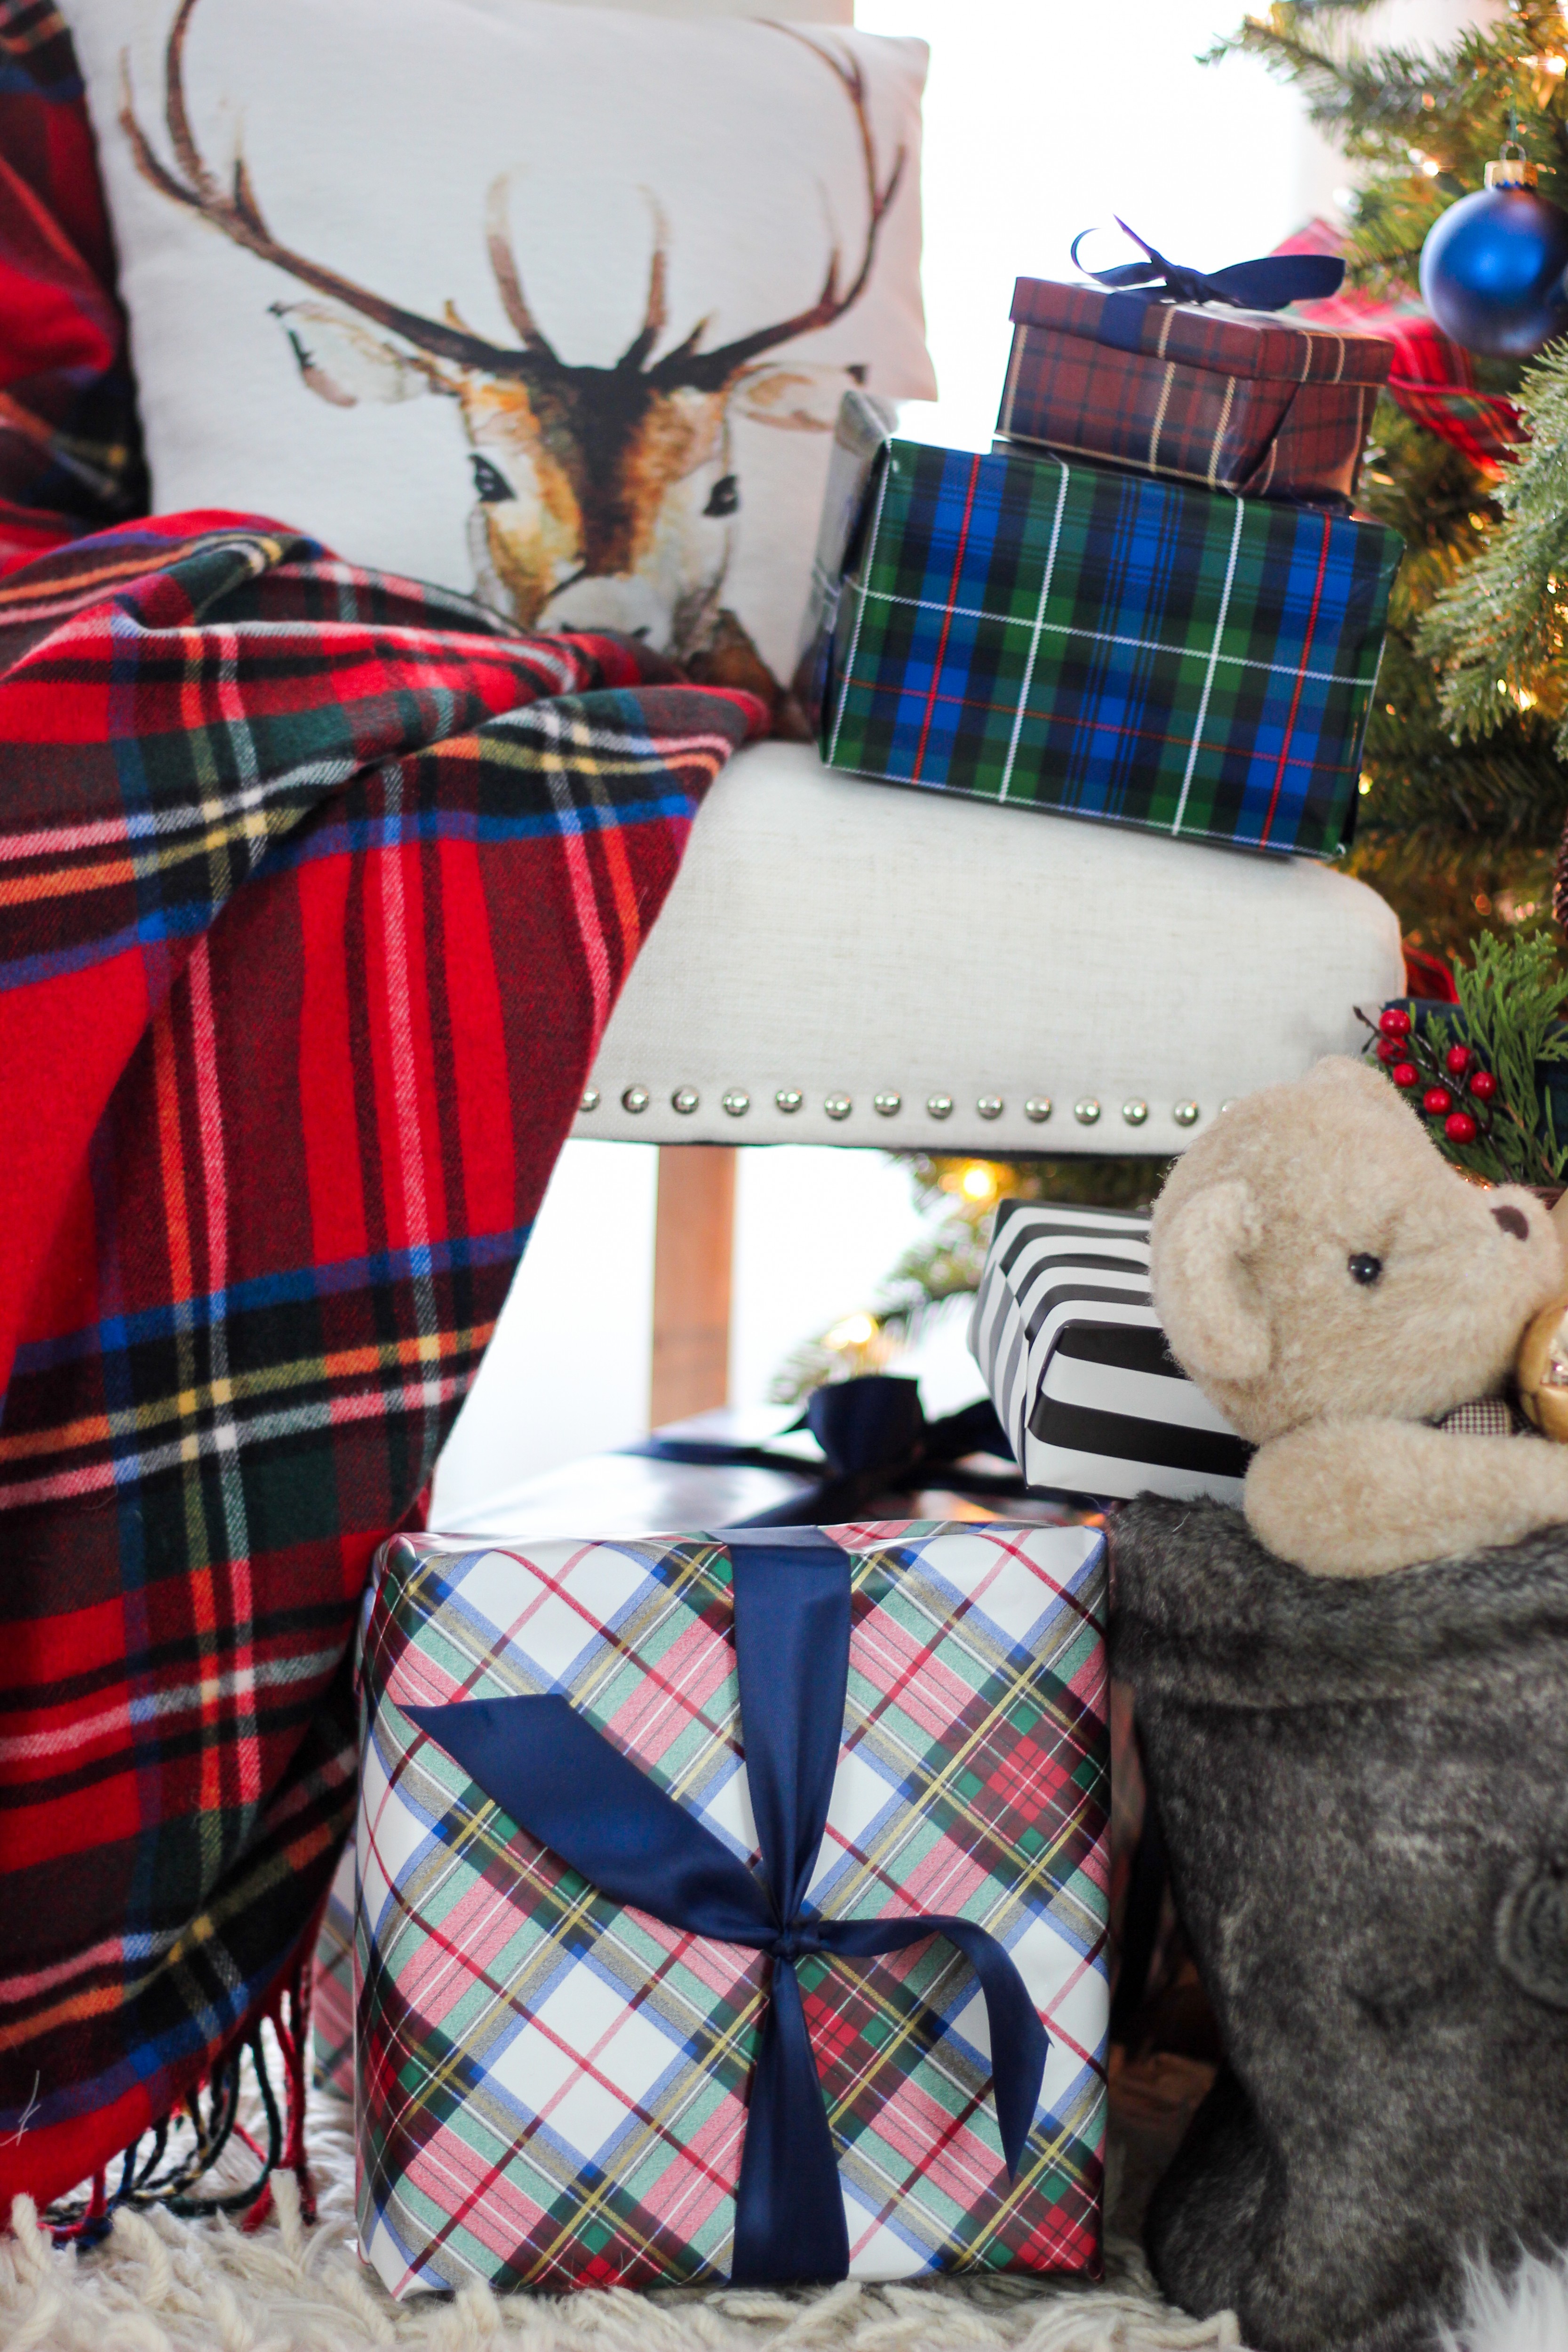 Michaels Makers The Preppy Tree – Plaids and Tartan